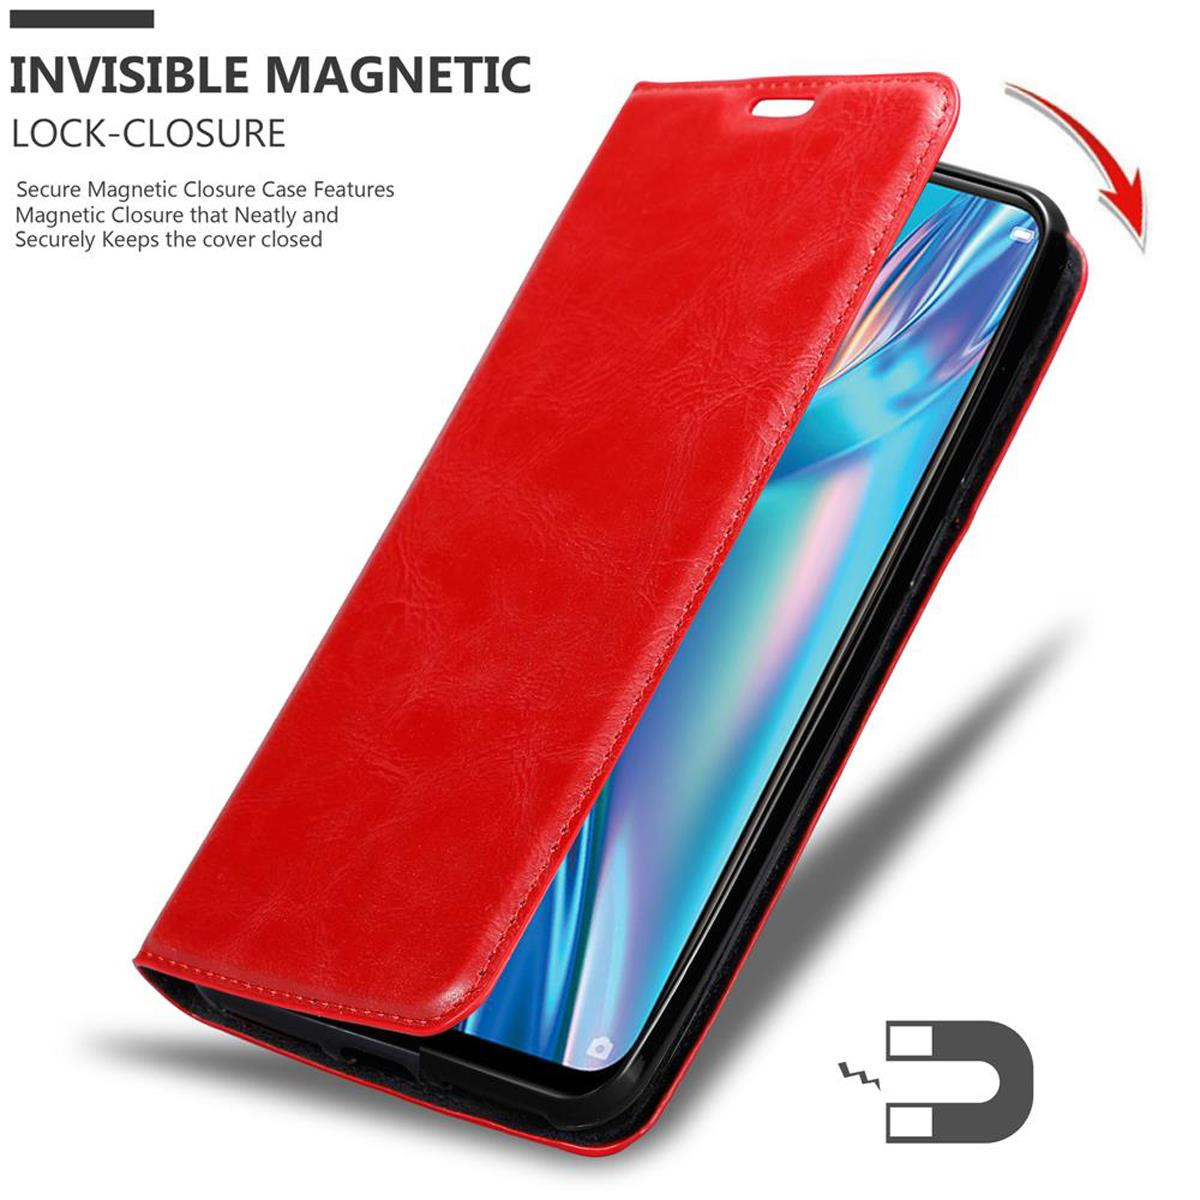 Oppo, Hülle Invisible Bookcover, APFEL A12, Book ROT Magnet, CADORABO